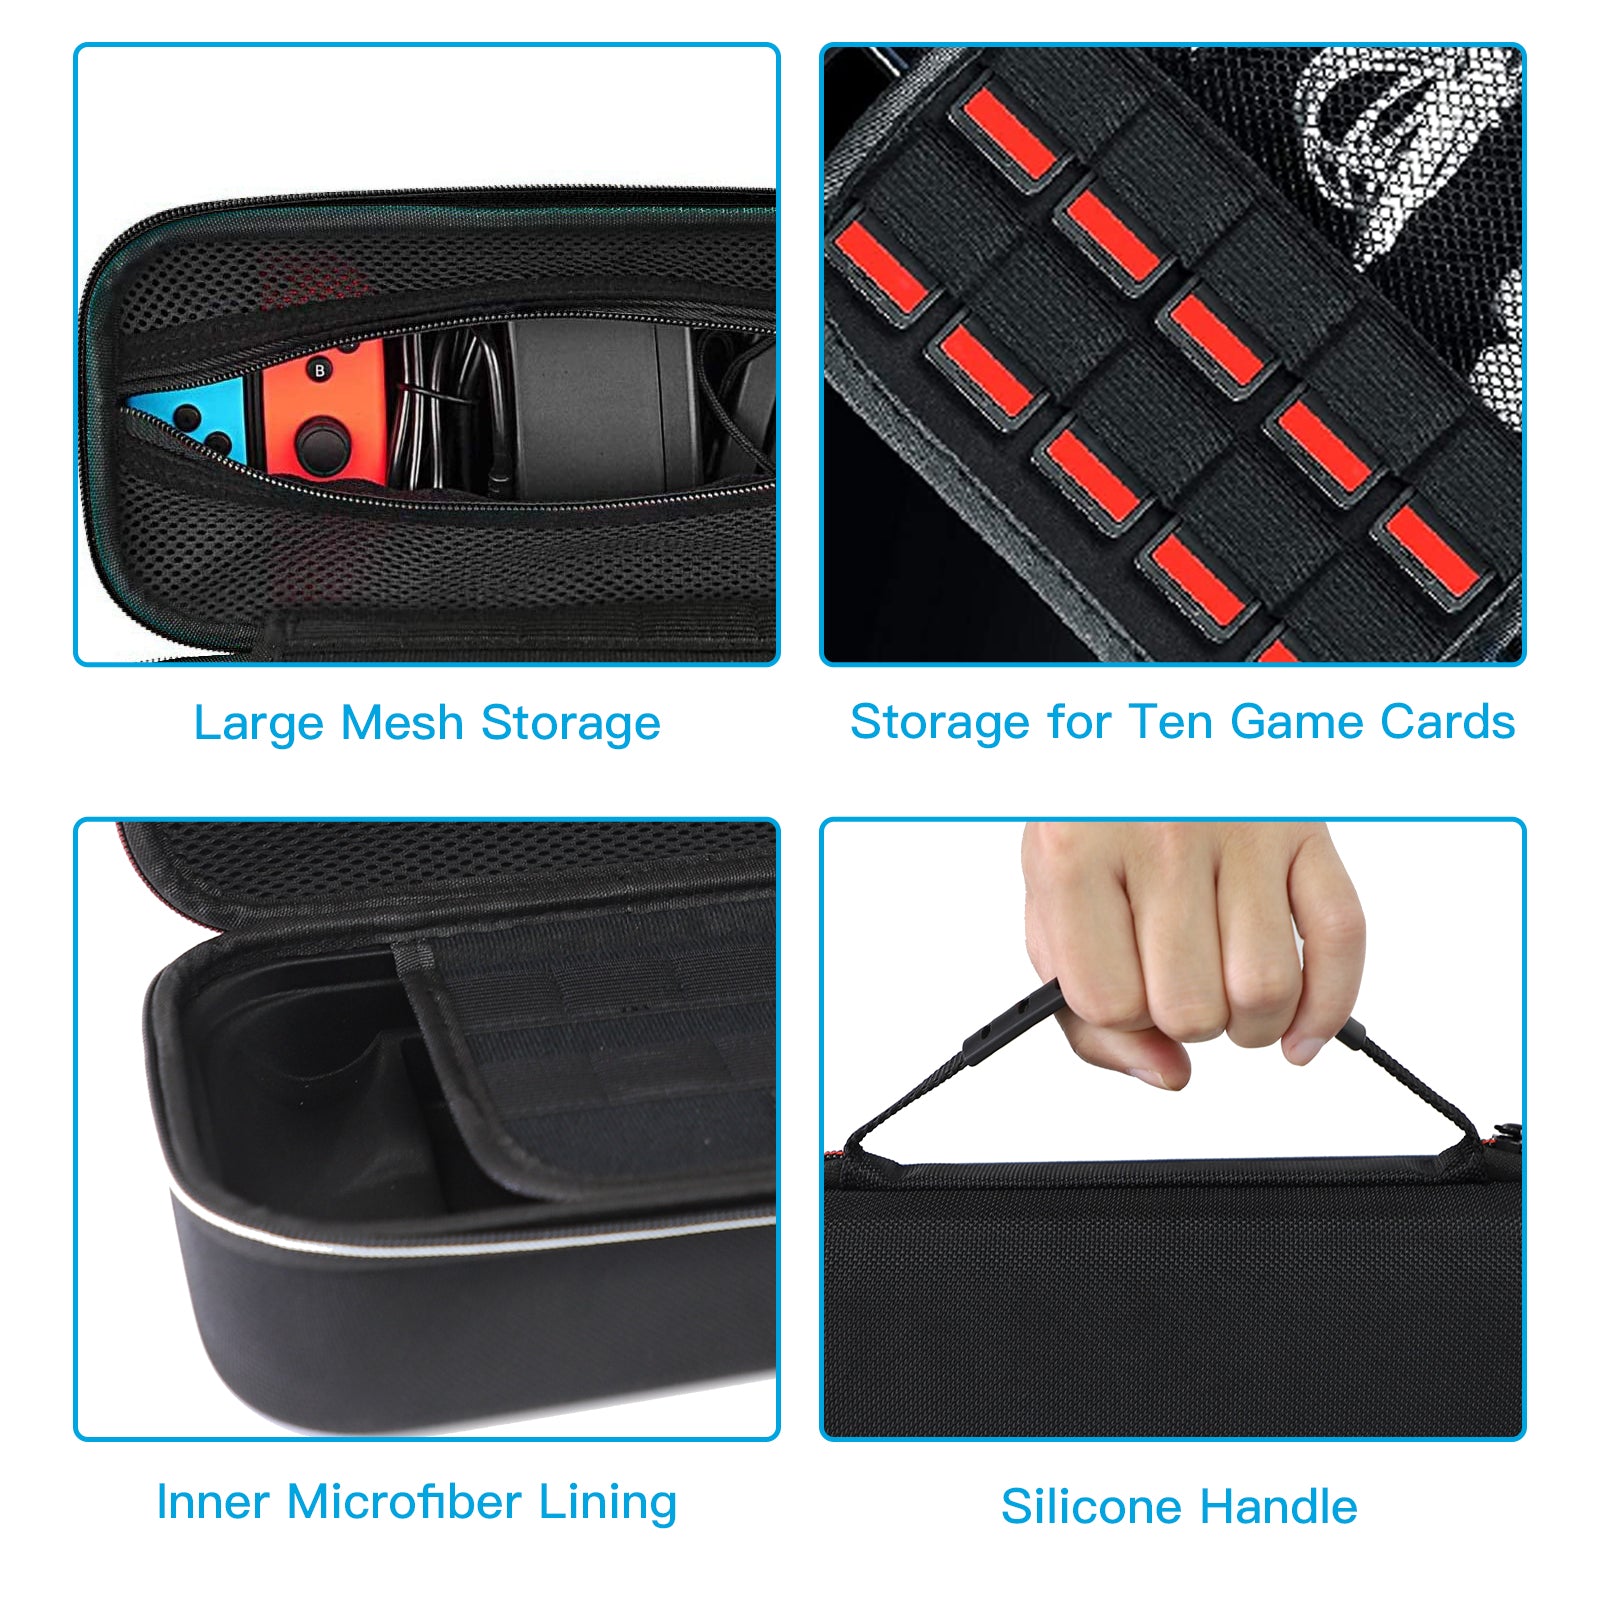 The case features a large mesh storage, inner microfiber lining, a handle, and game cards slot.